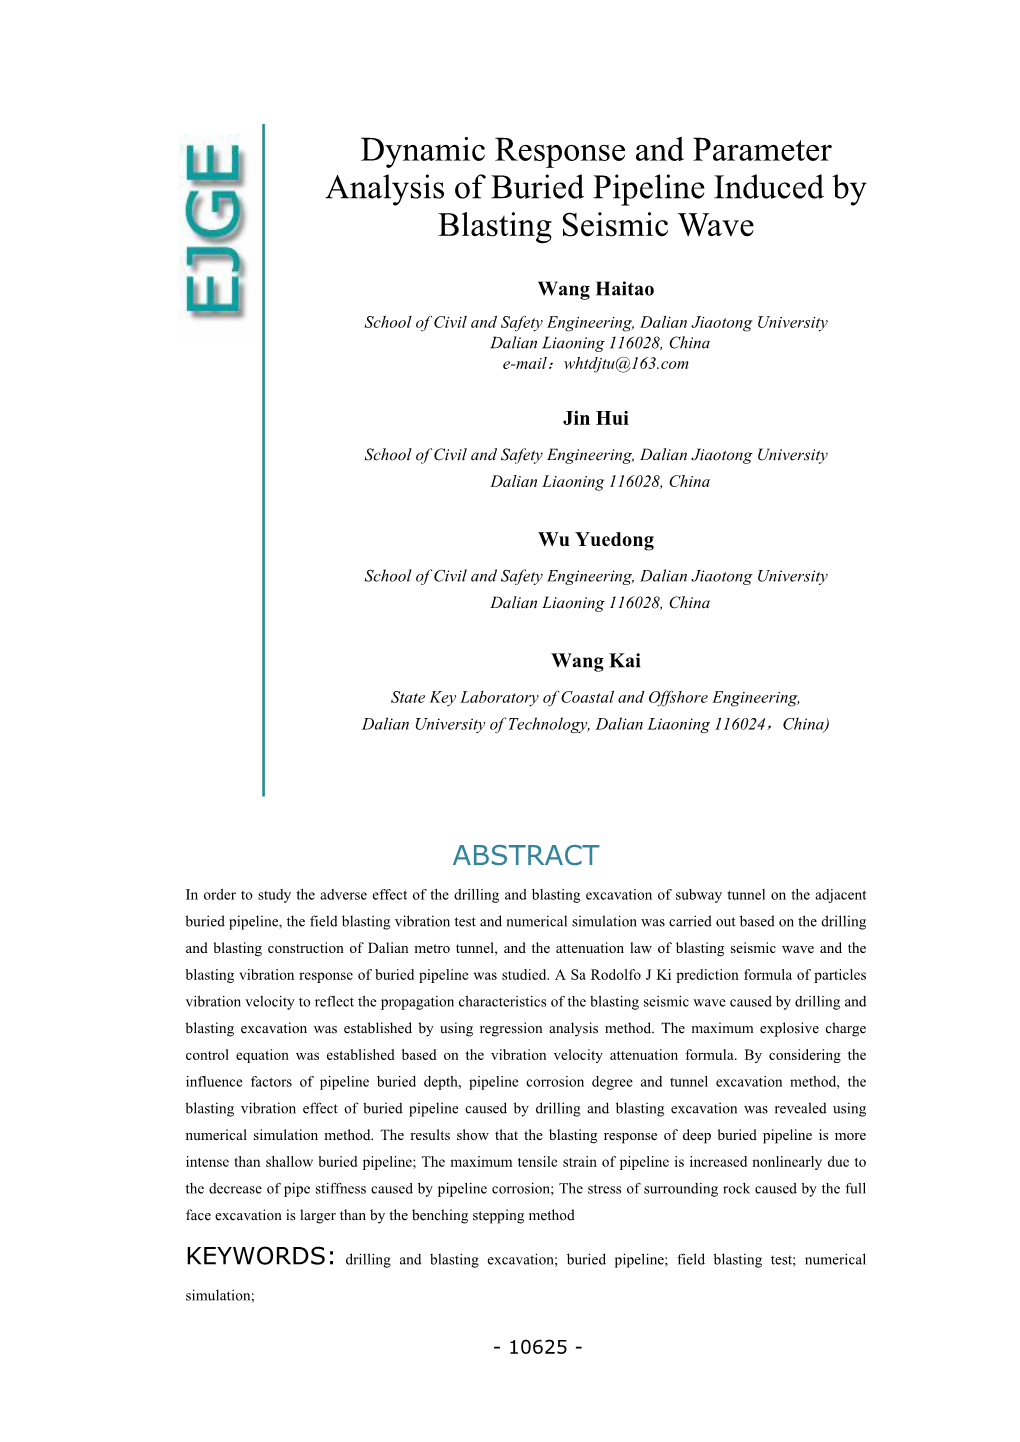 Dynamic Response and Parameter Analysis of Buried Pipeline Induced by Blasting Seismic Wave